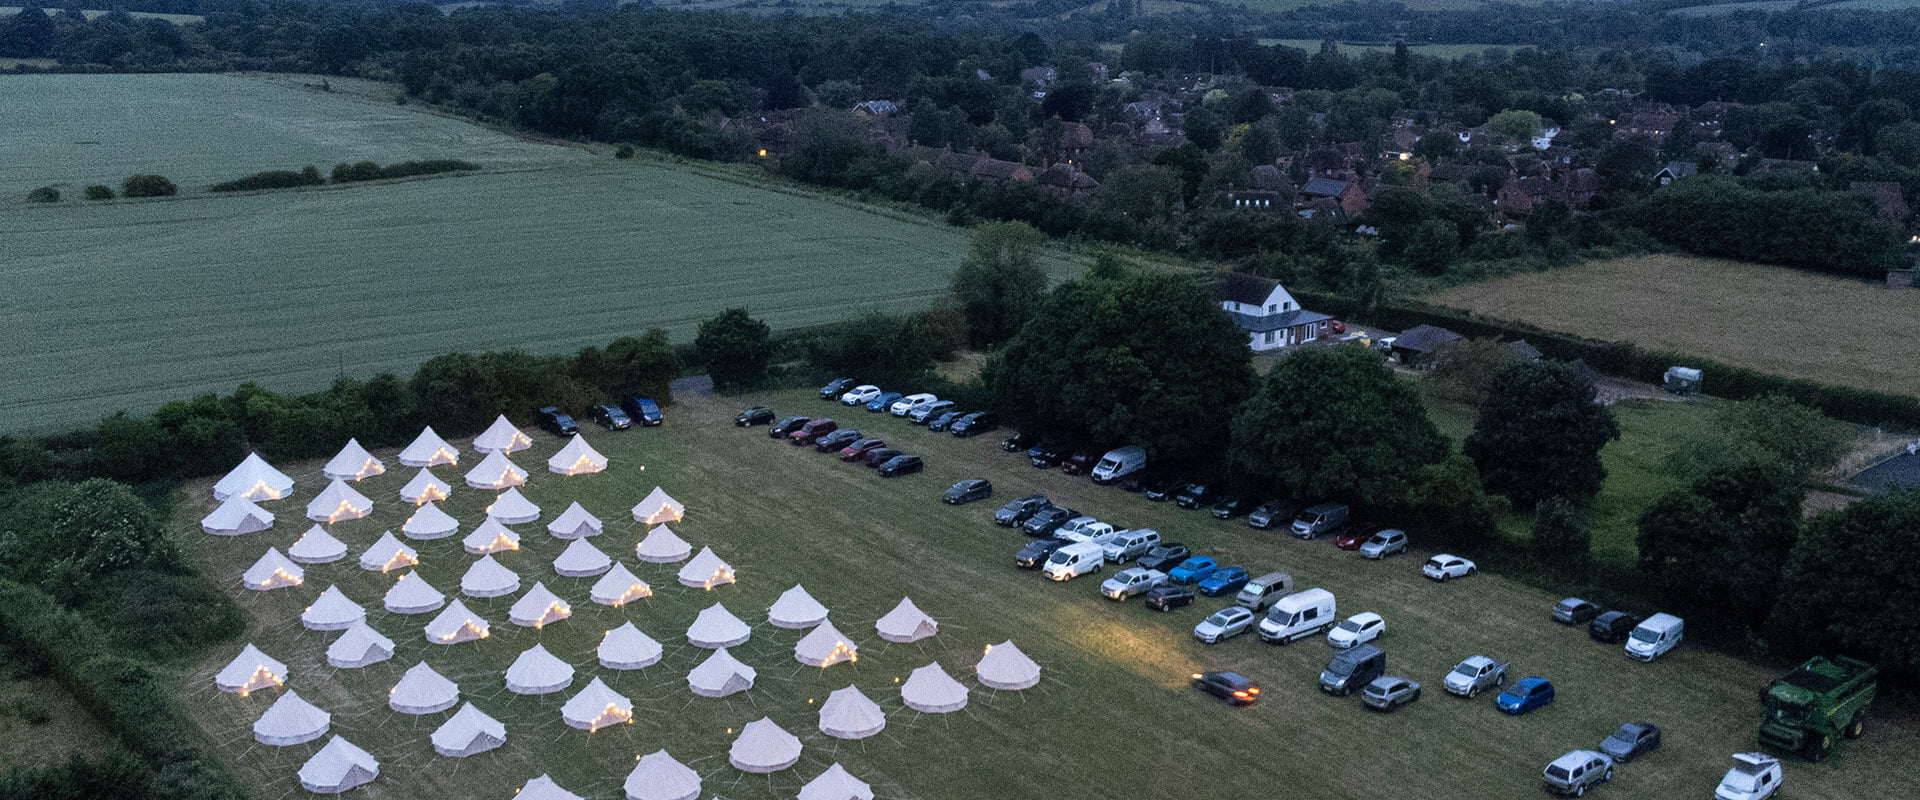 New Forest Bell Tents can supply a whole campsite